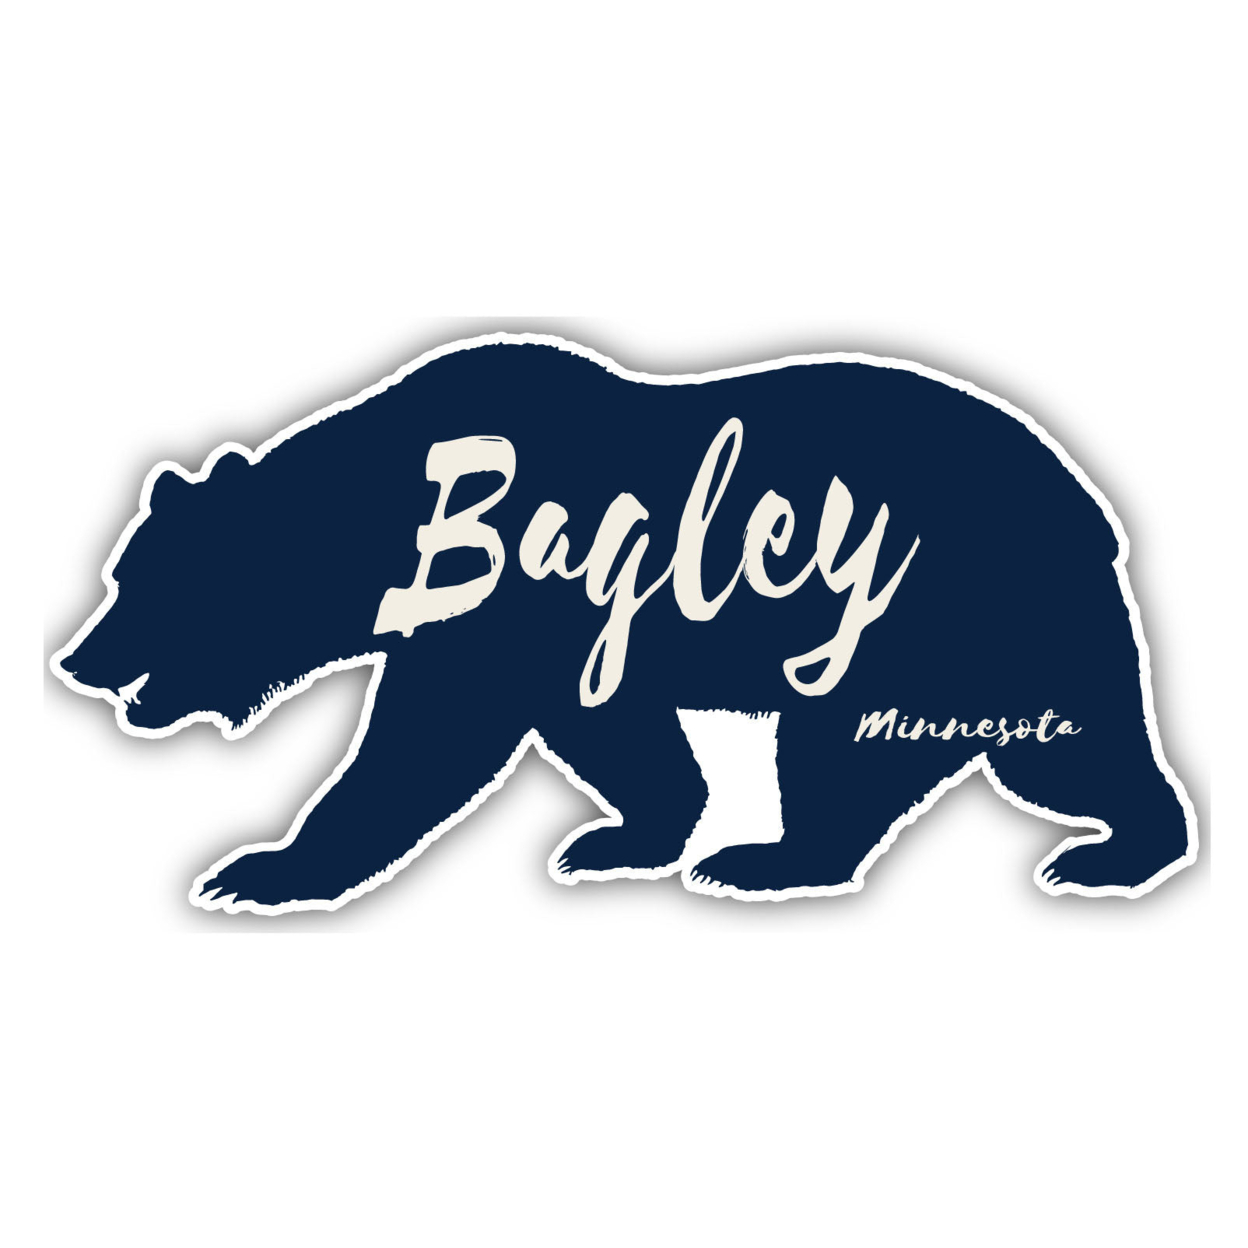 Bagley Minnesota Souvenir Decorative Stickers (Choose Theme And Size) - 4-Pack, 10-Inch, Bear